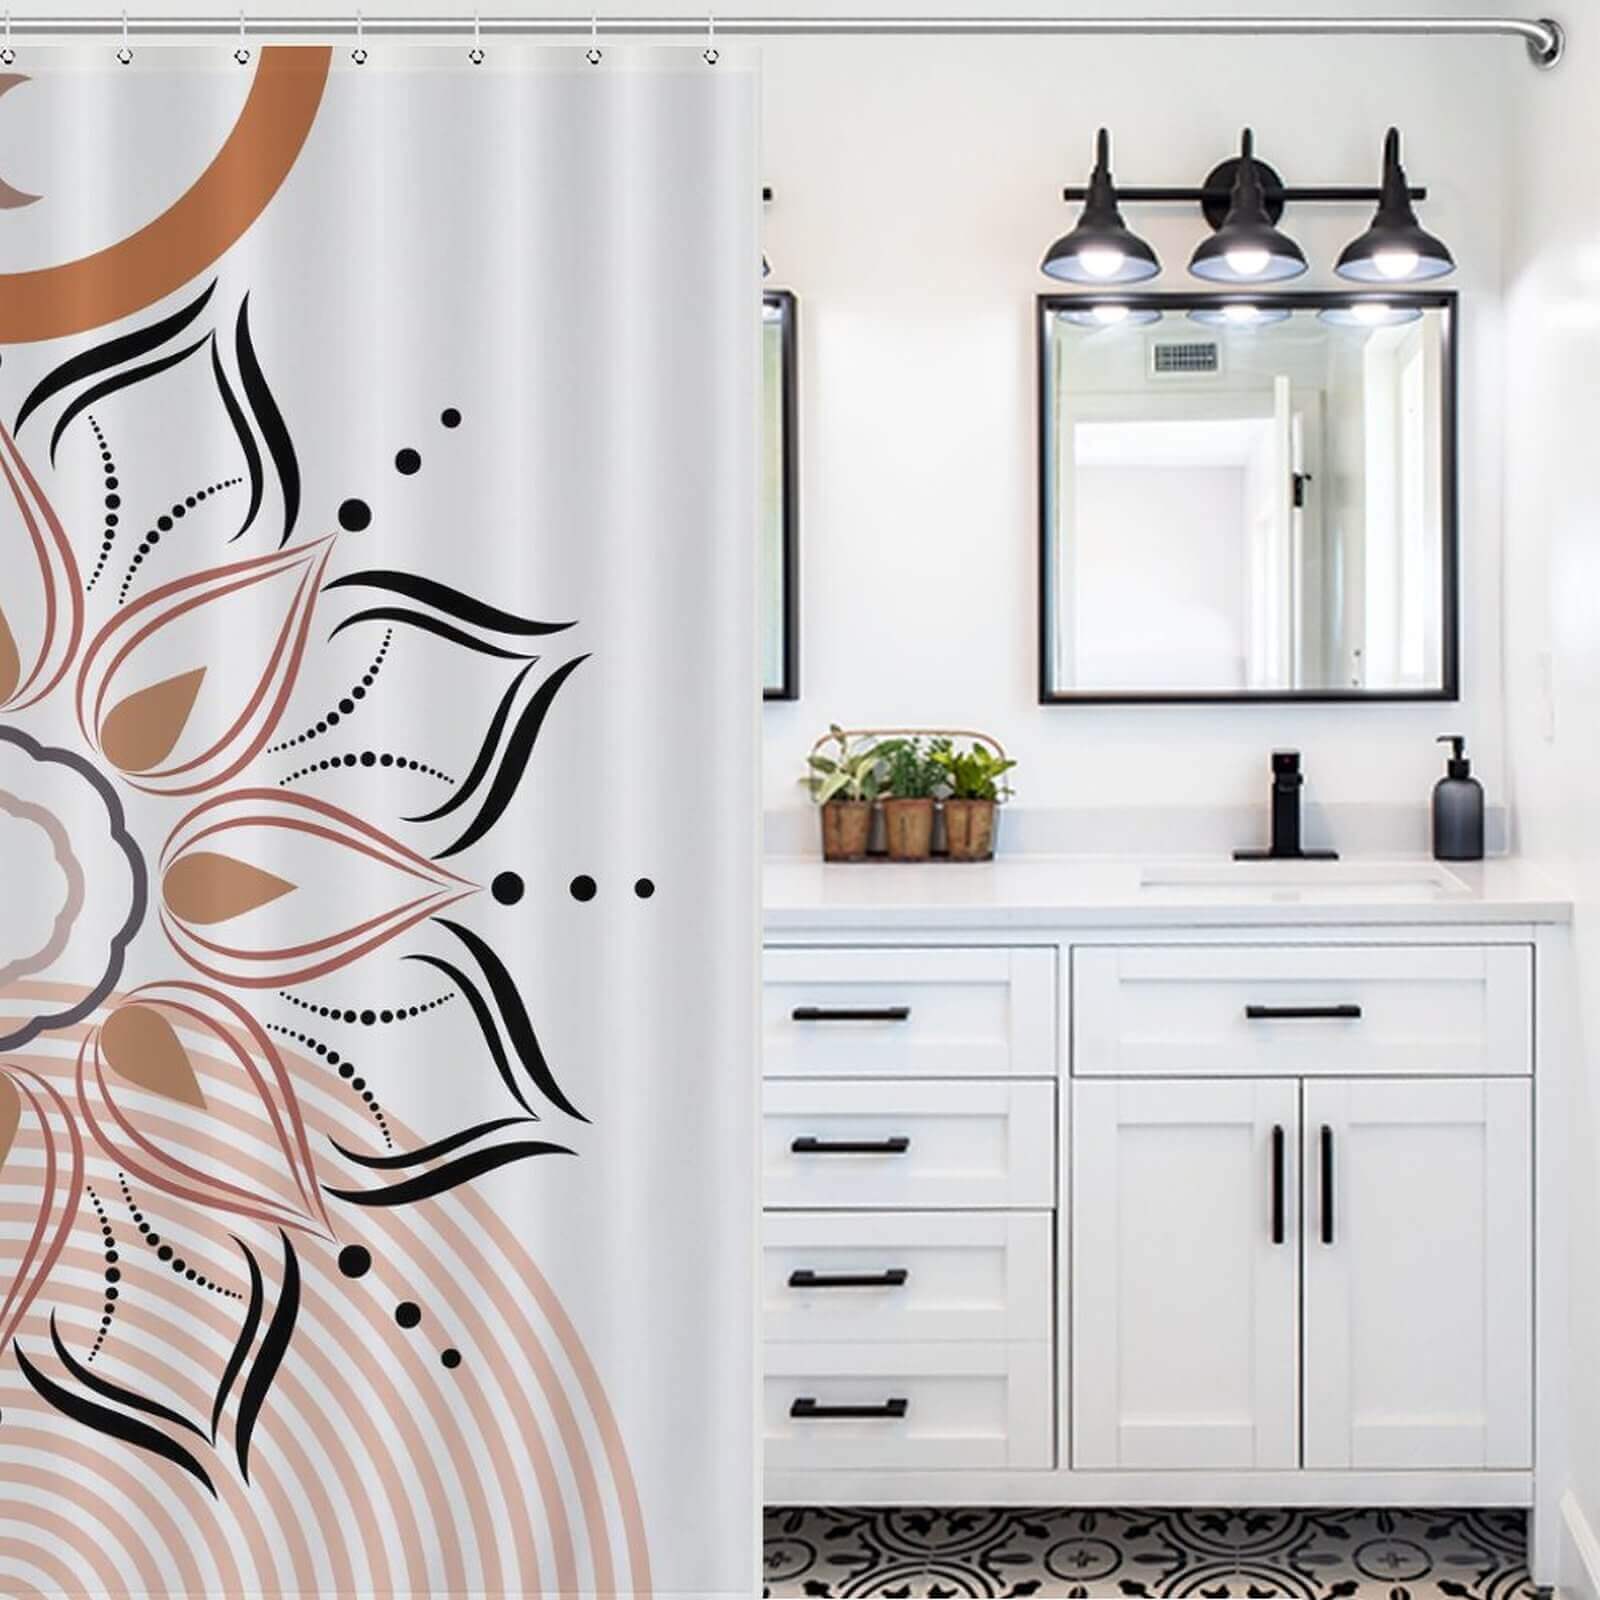 Enhance the ambiance of your bathroom with a stunning Boho Mandala shower curtain from CottonCat in vibrant shades of orange and black.